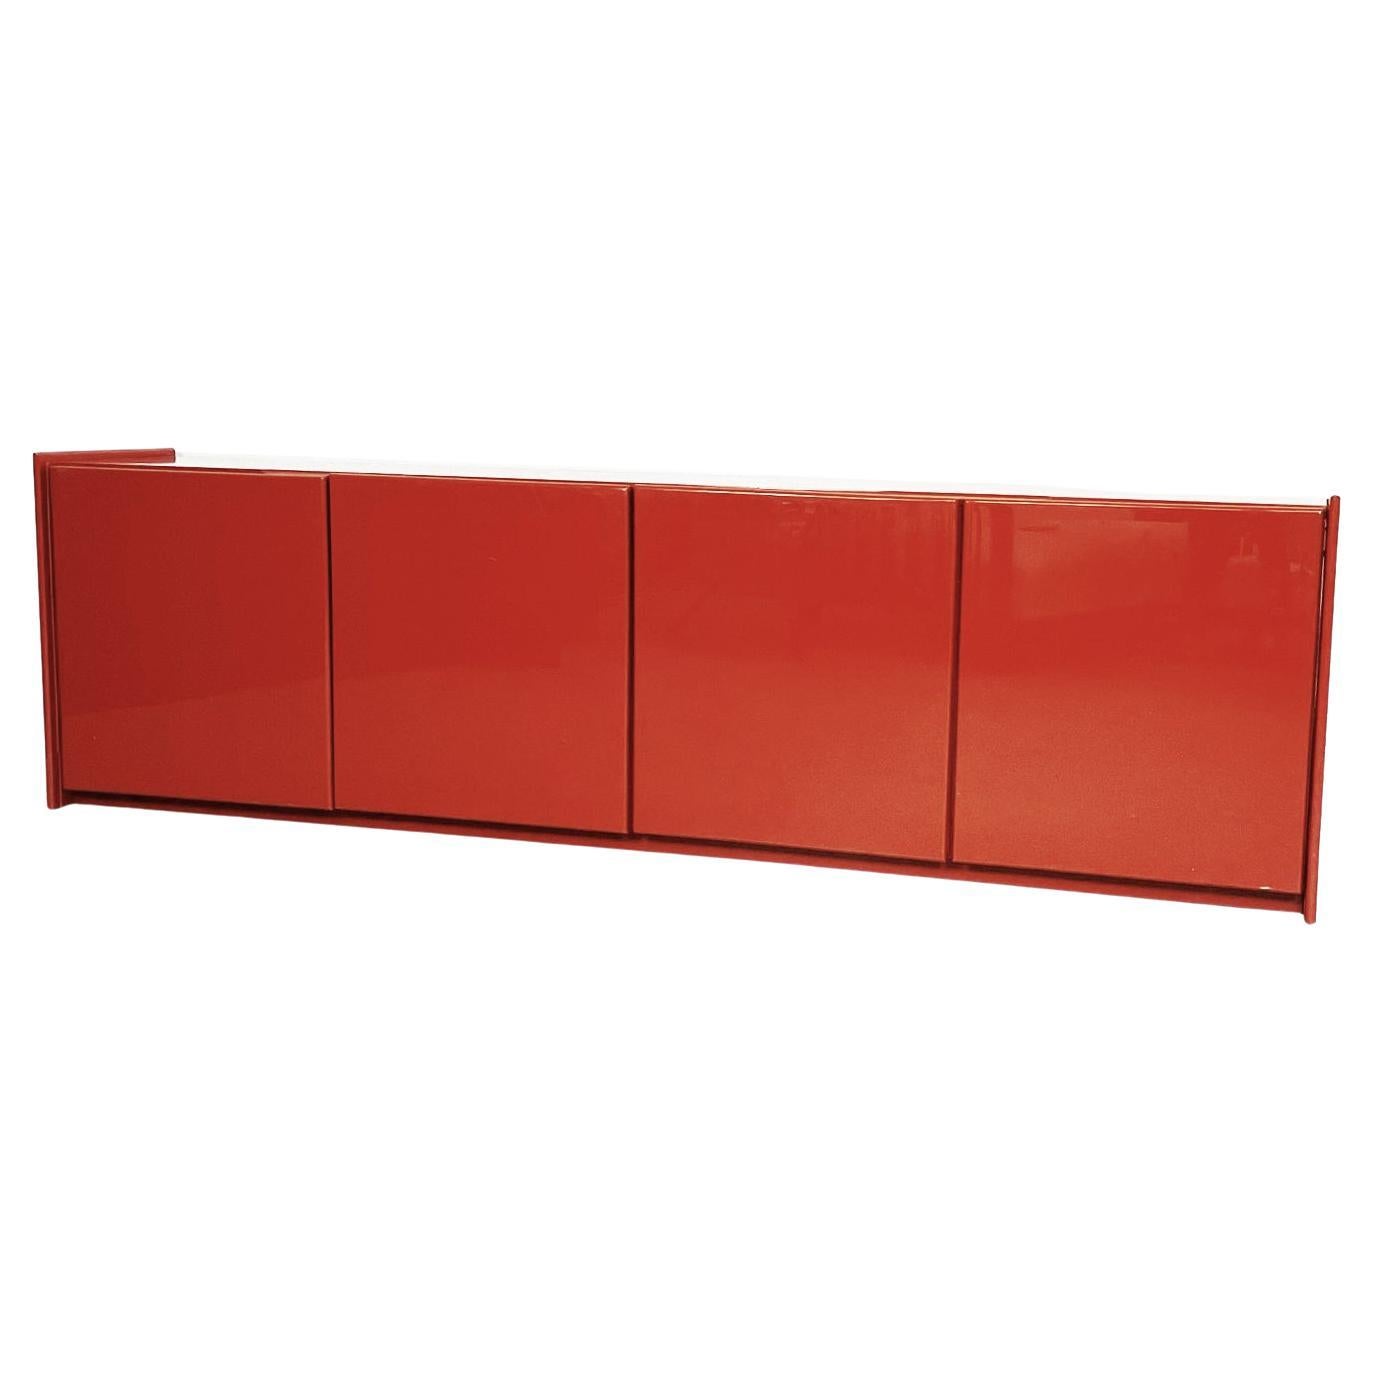 Italian Mid-Century Modern Rectangular Red Lacquered Solid Wood Sideboard, 1980s